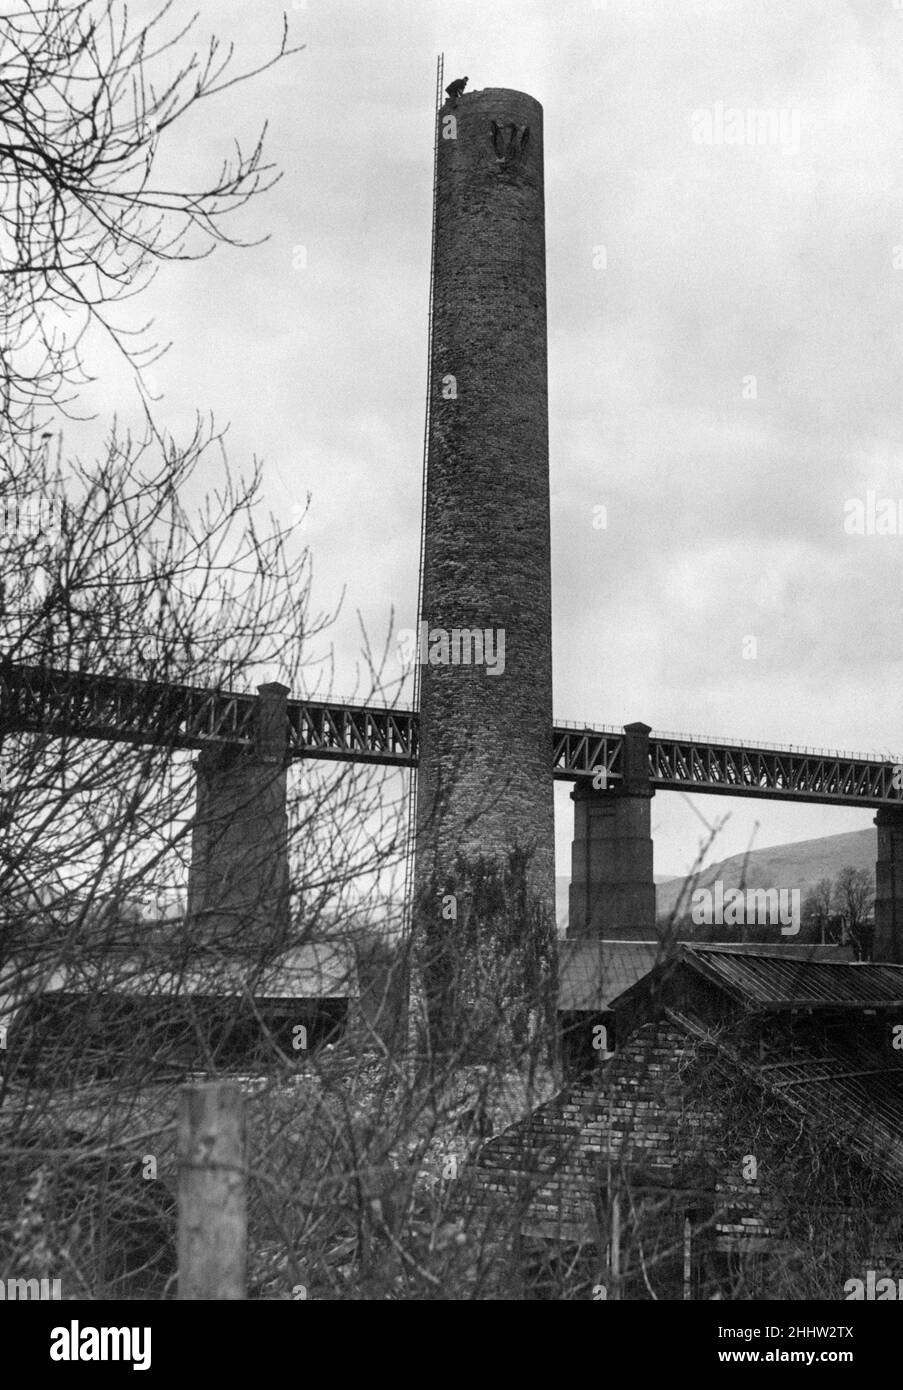 Walnut Tree Viaduct, a railway viaduct located above the southern edge of the village of Taffs Well, Cardiff, South Wales, Wednesday 9th January 1952. Made of Brick columns and Steel lattice girders spans.  Our Picture Shows ... Steeplejacks at work dismantling the stack of the old Melingriffith Tin Plate works at Taffs Well. Stock Photo